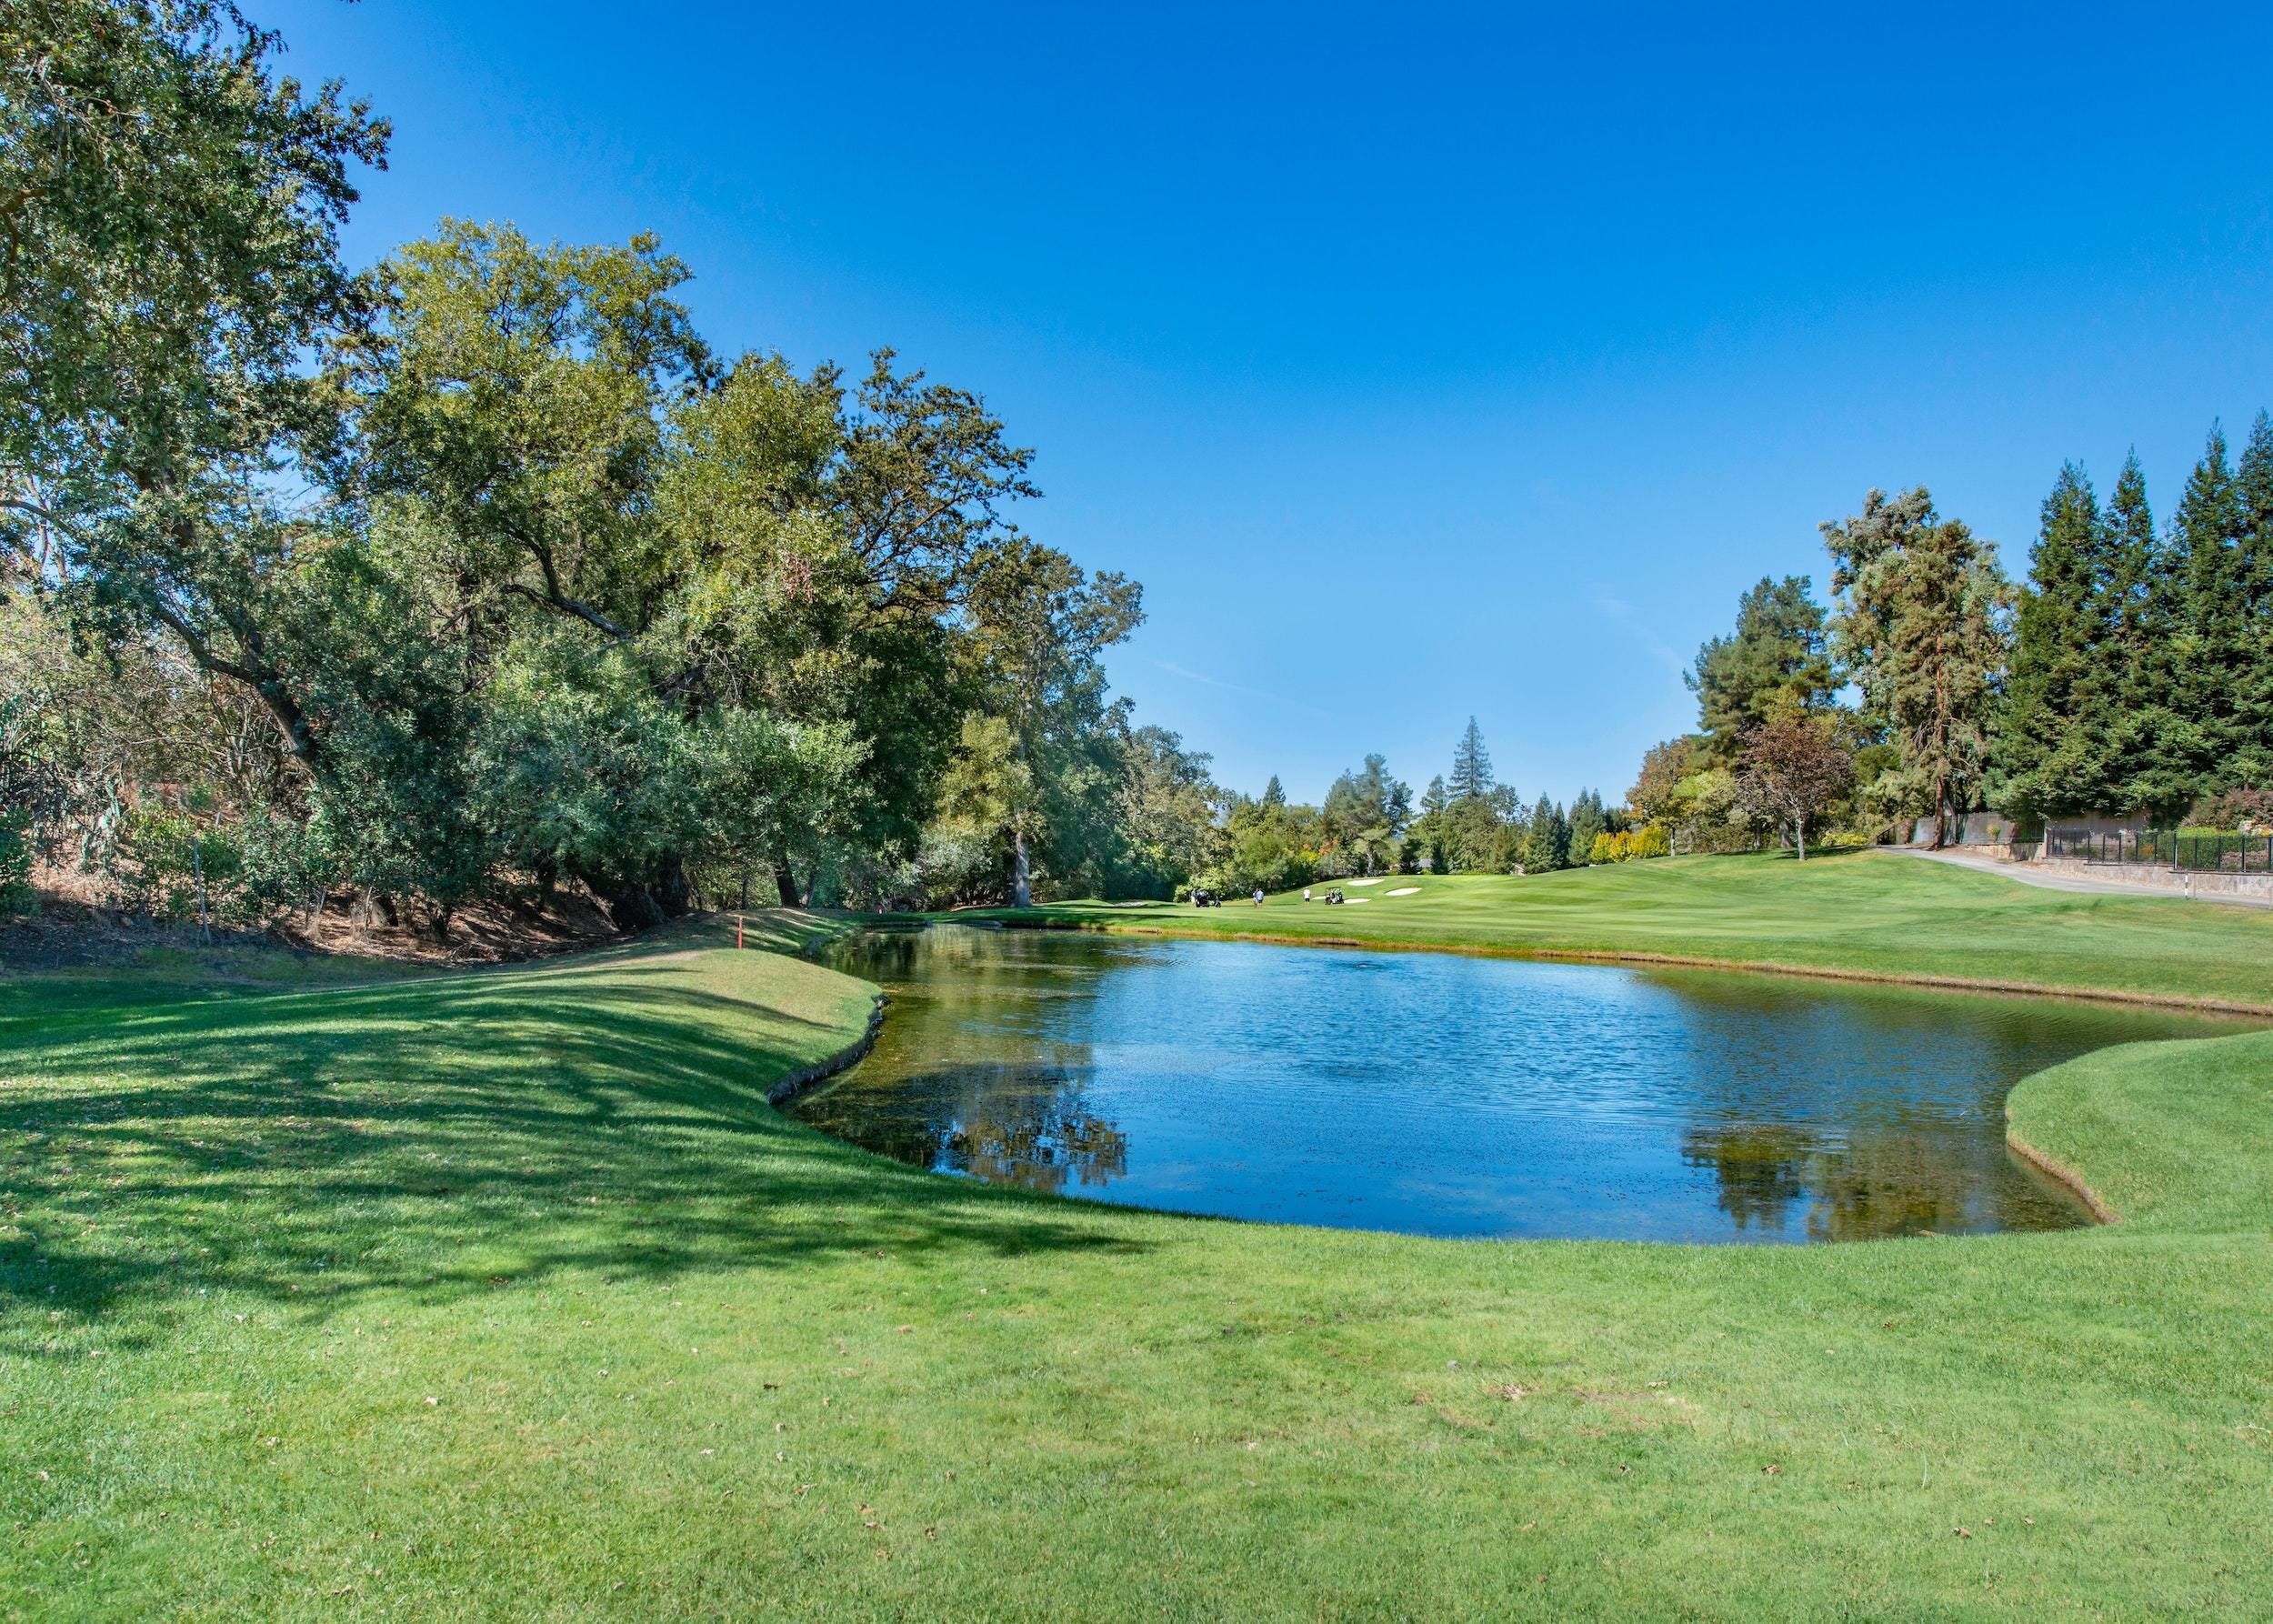 Check out this week's curated list of the best properties near local DFW golf courses.